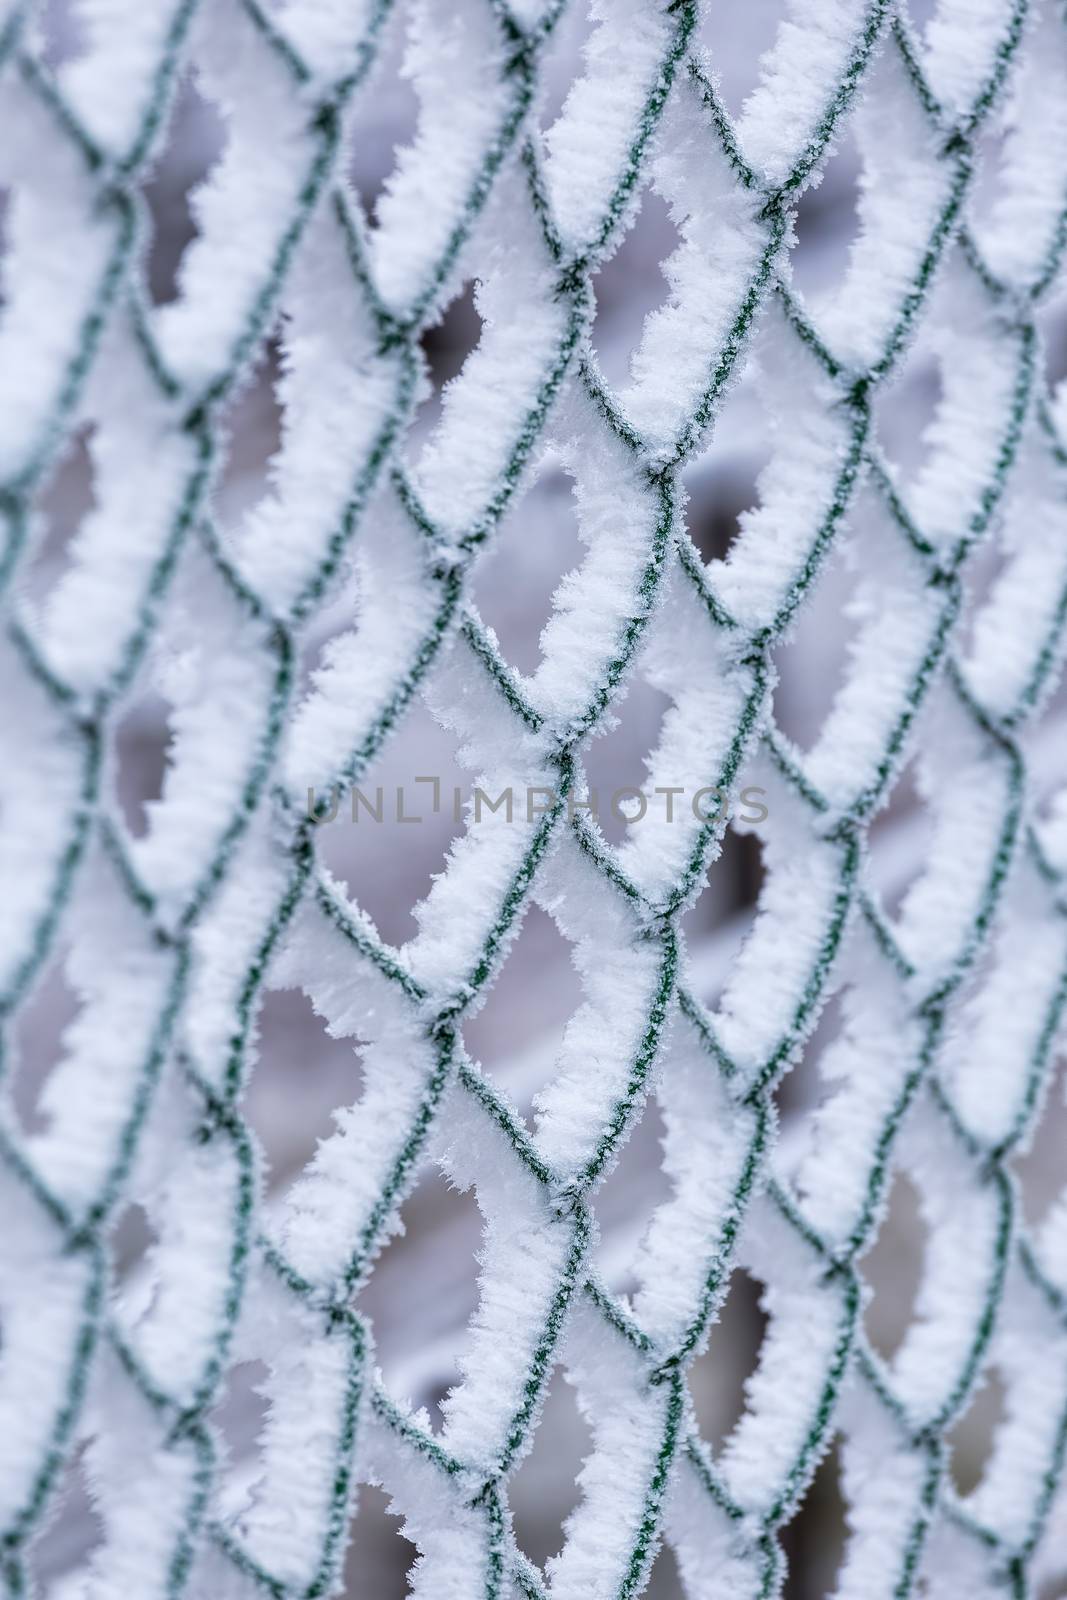 Frozen fence on a cold winter day